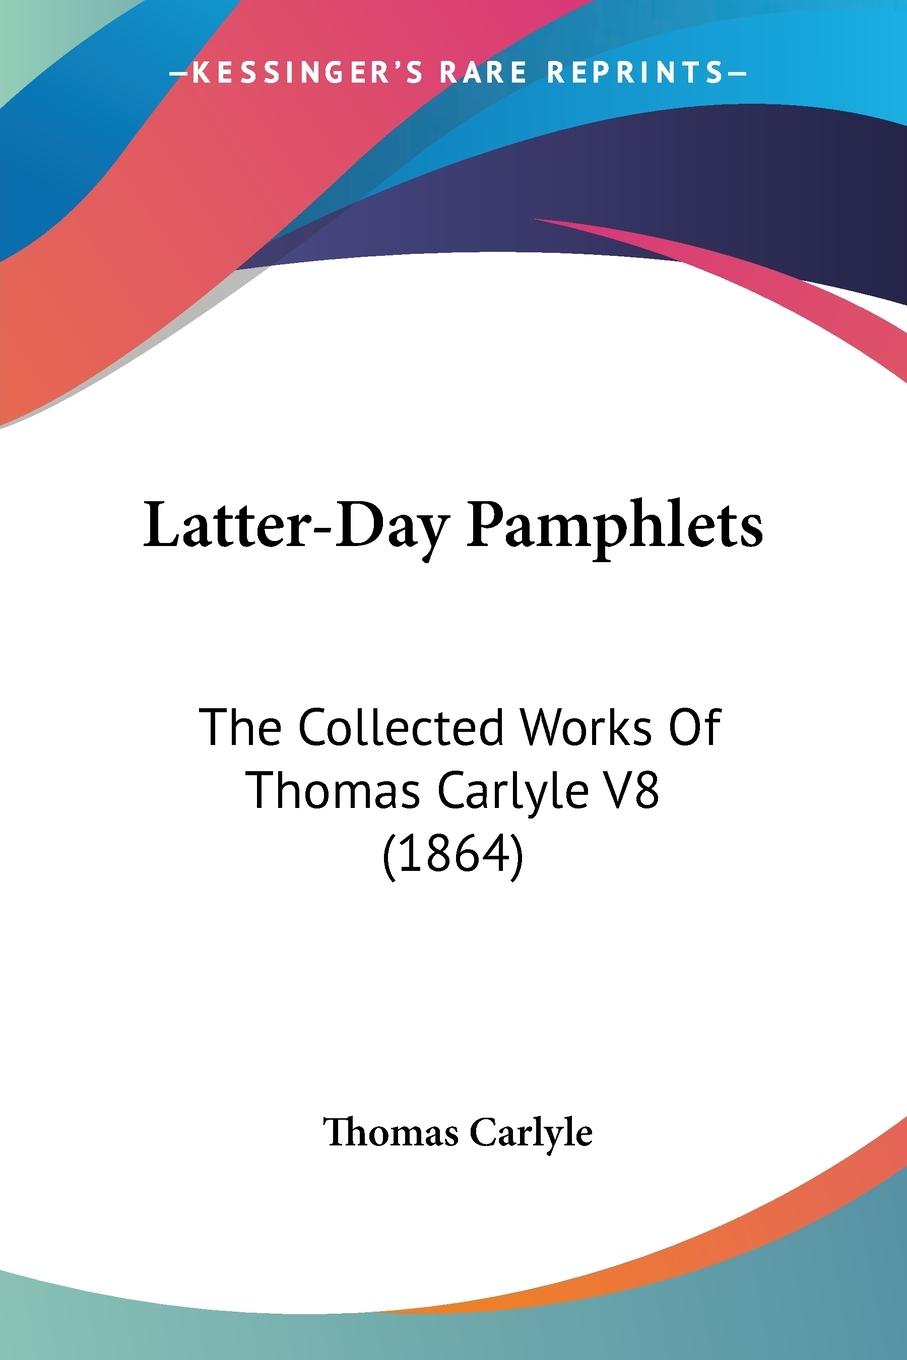 Latter-Day Pamphlets - Carlyle, Thomas